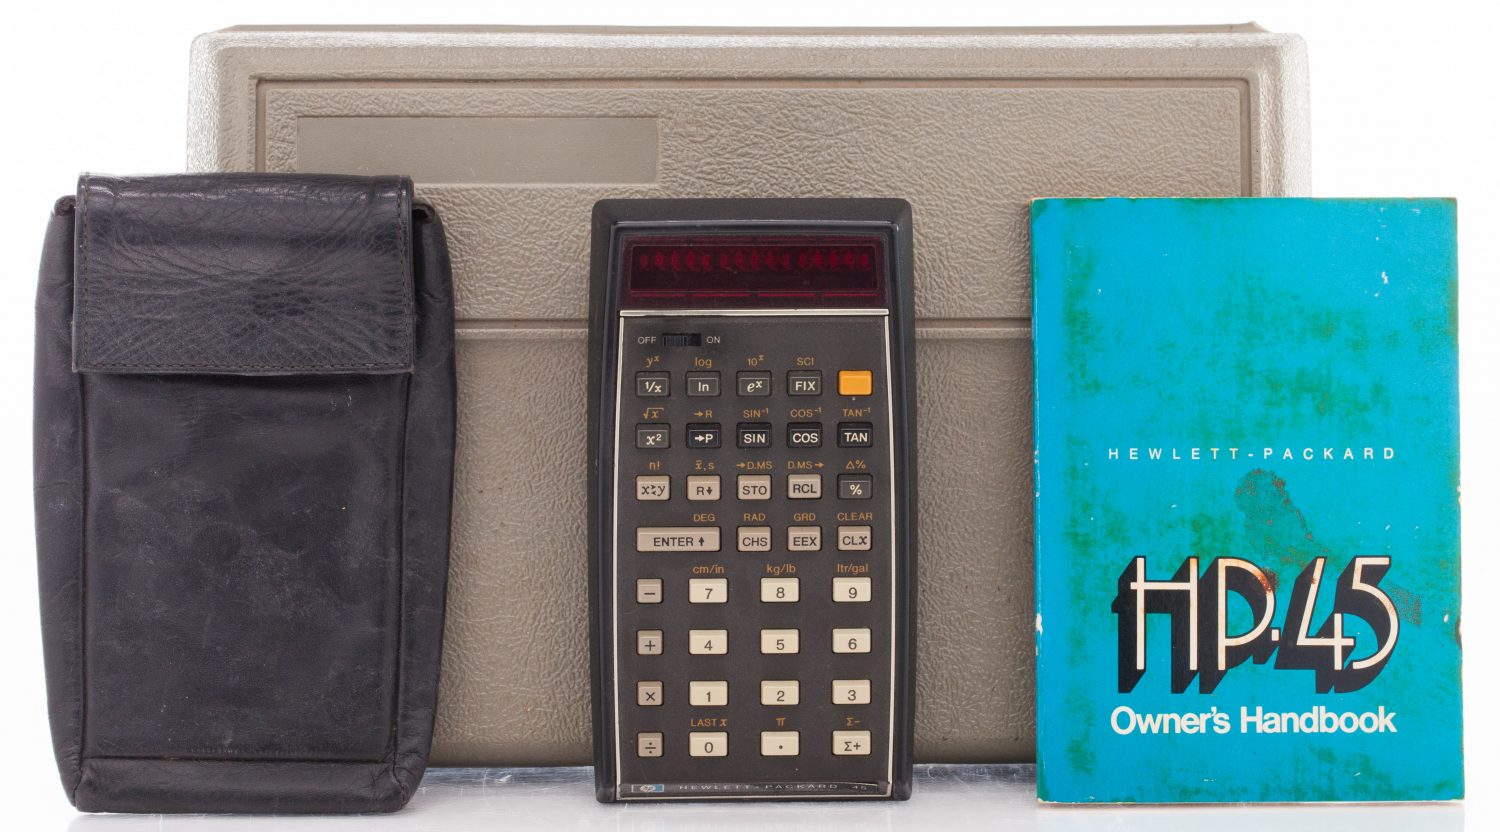 HP 45 calculator with carrying pouch and owner's handbook in front of a plastic storage case.